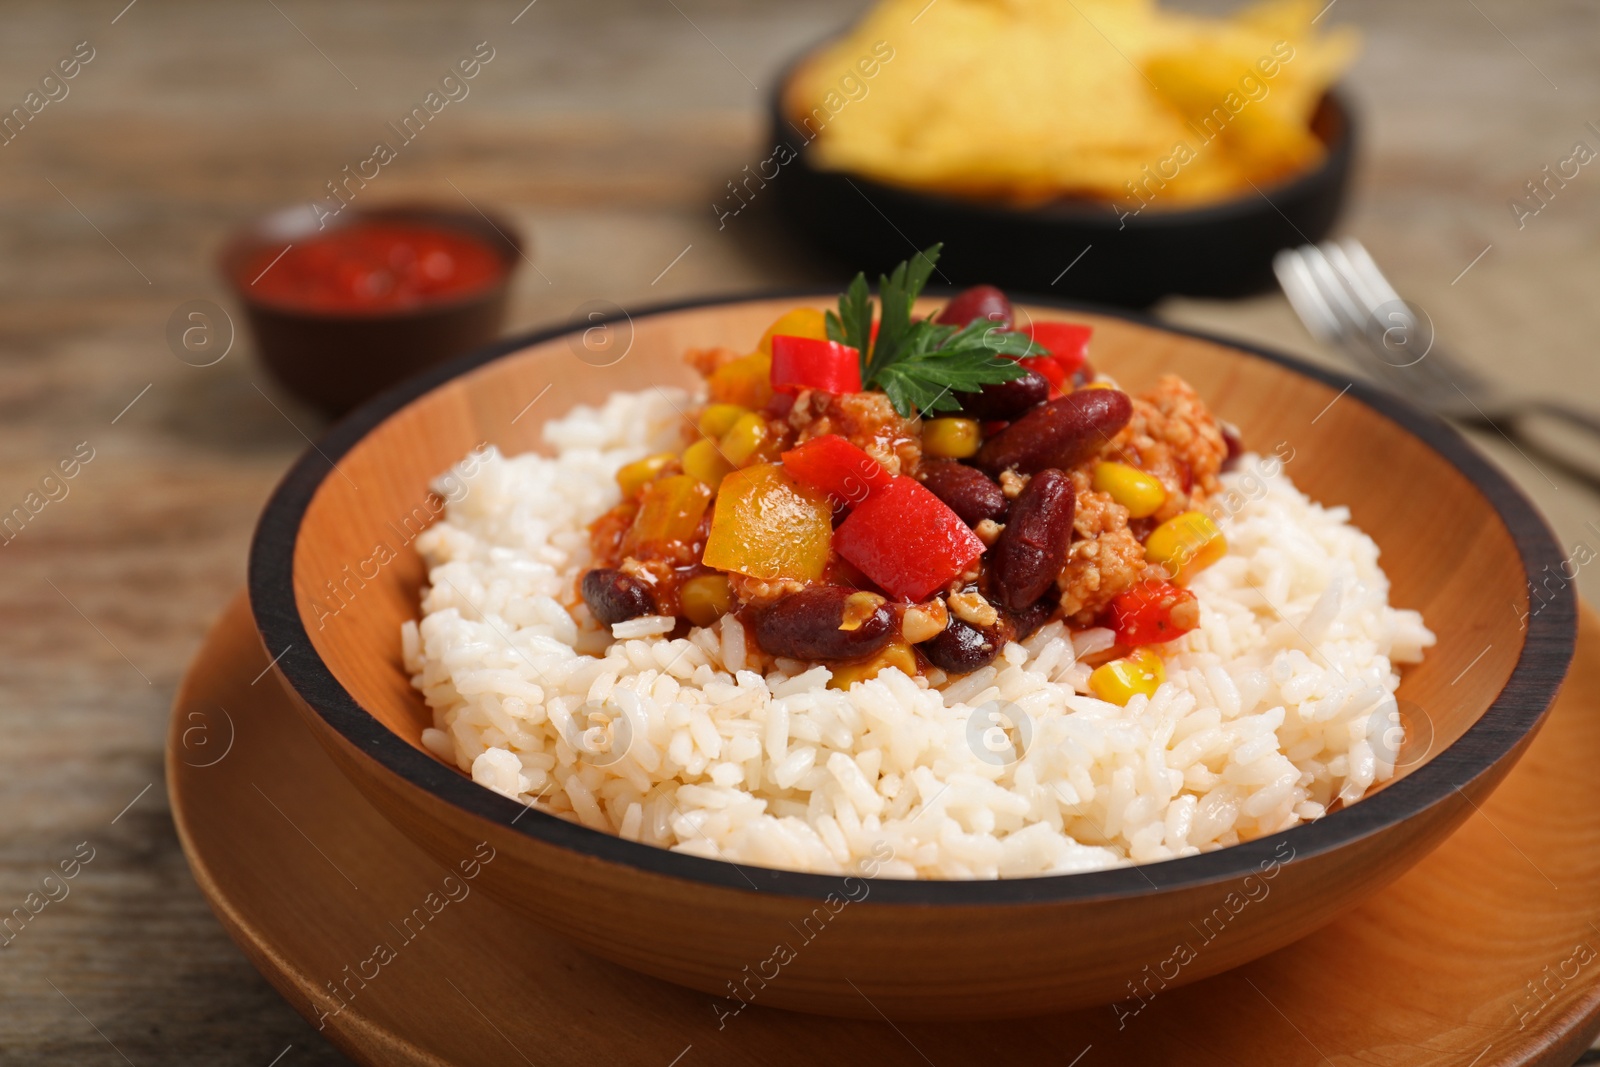 Photo of Chili con carne served with rice in bowl on table